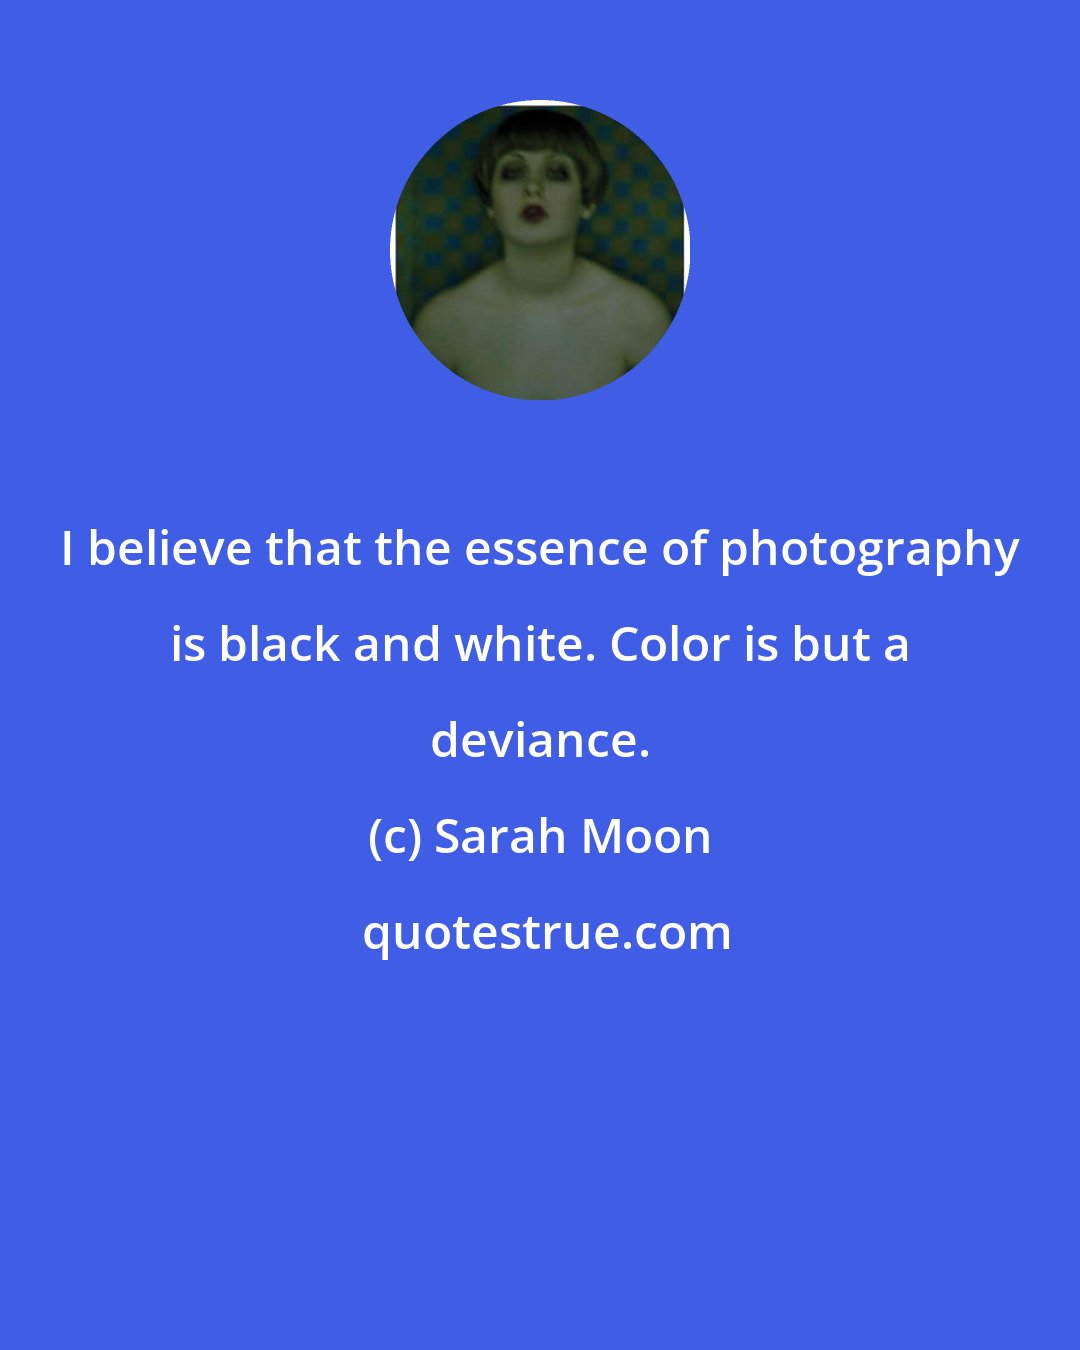 Sarah Moon: I believe that the essence of photography is black and white. Color is but a deviance.